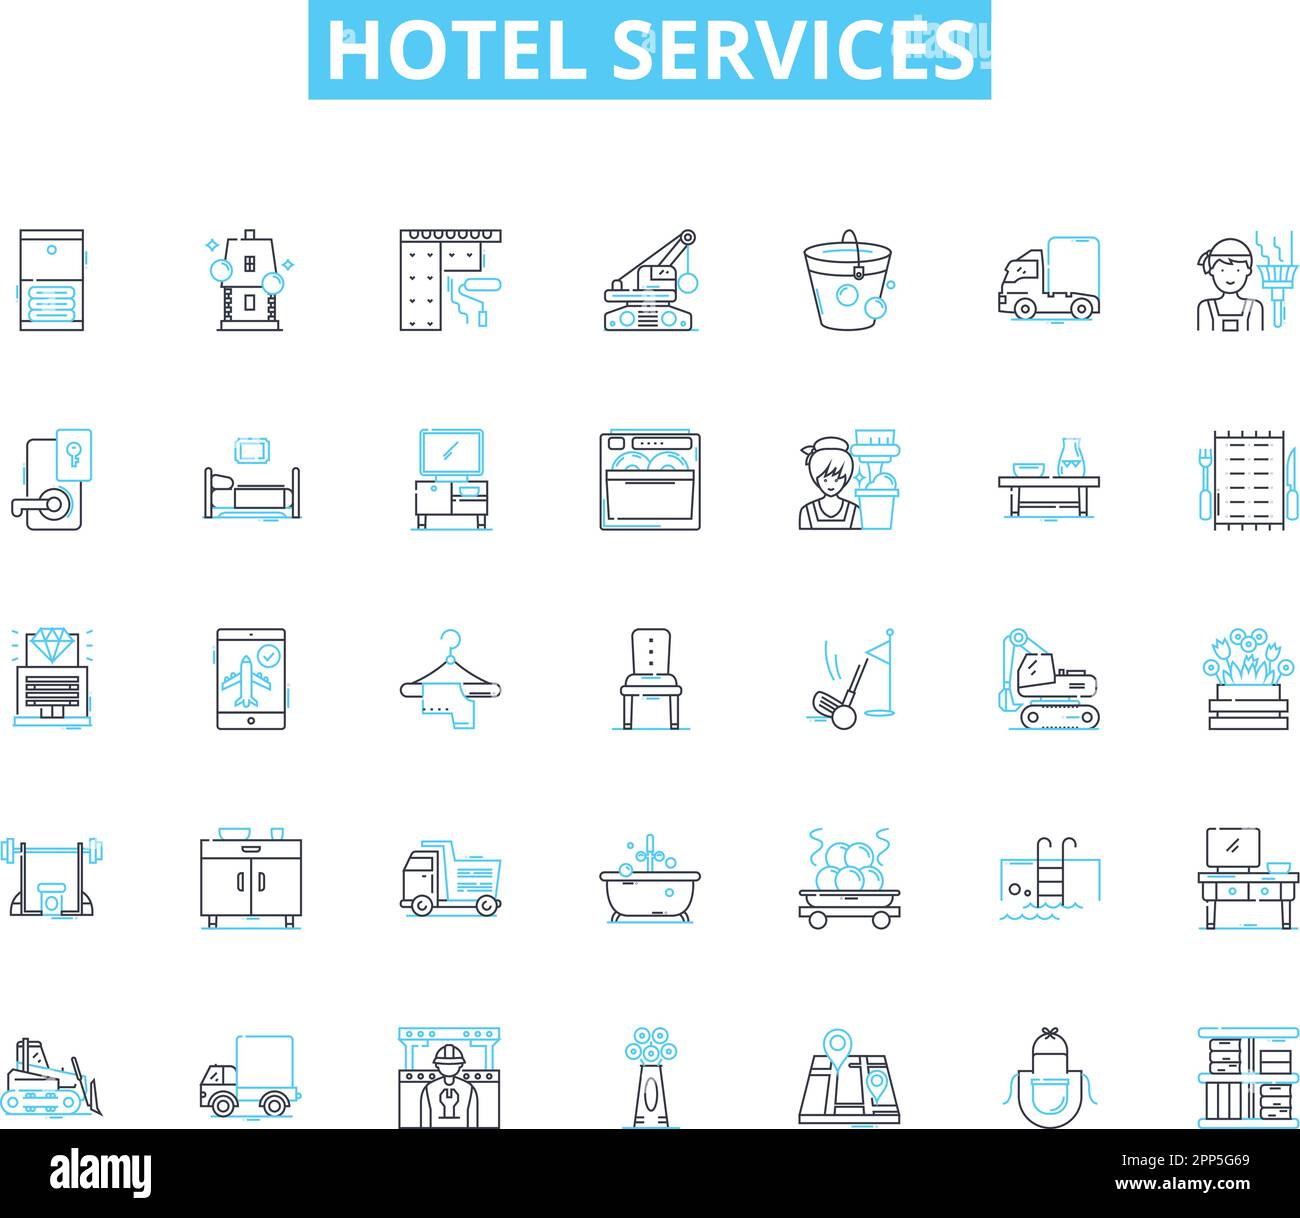 Hotel services linear icons set. ospitality, Accommodations, Amenities, Concierge, Room service, Housekeeping, Reception line vector and concept signs Stock Vector